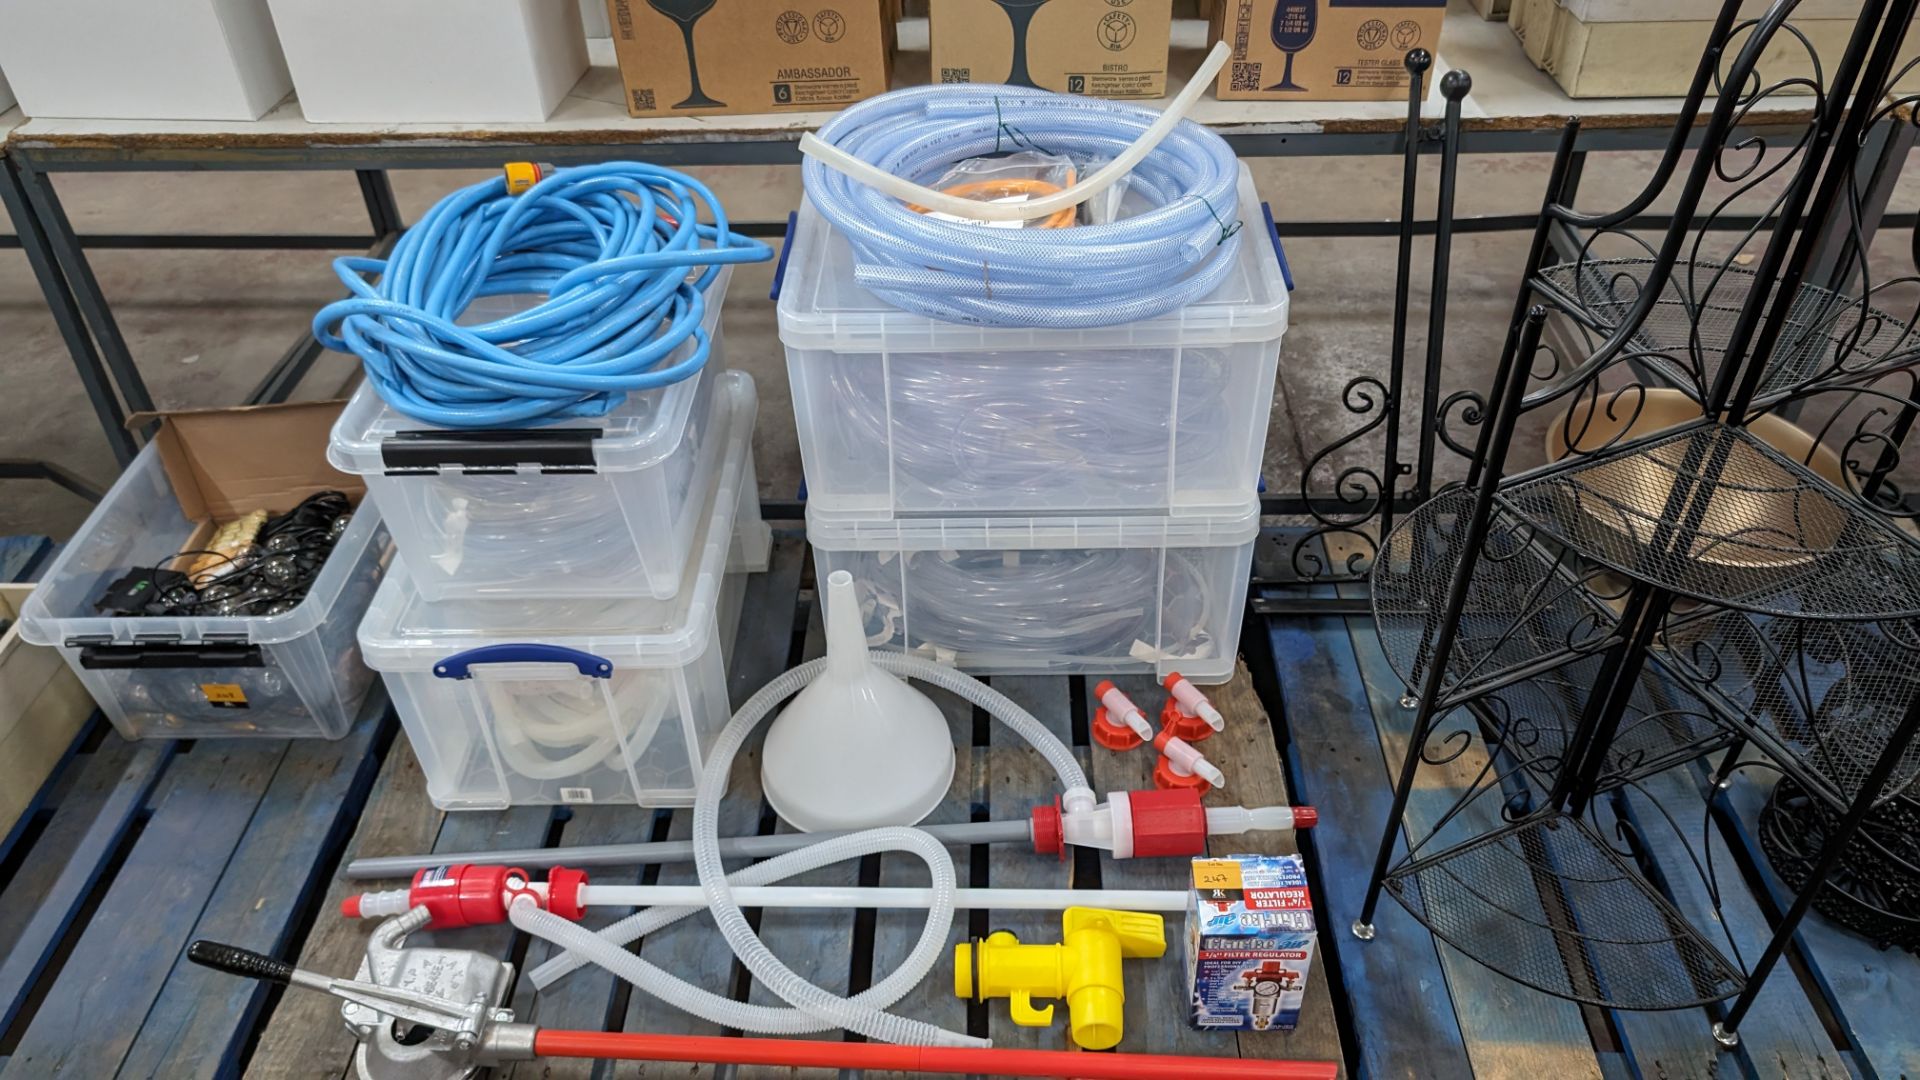 The contents of a pallet of hose, pumps and related items. NB: Plastic crates excluded